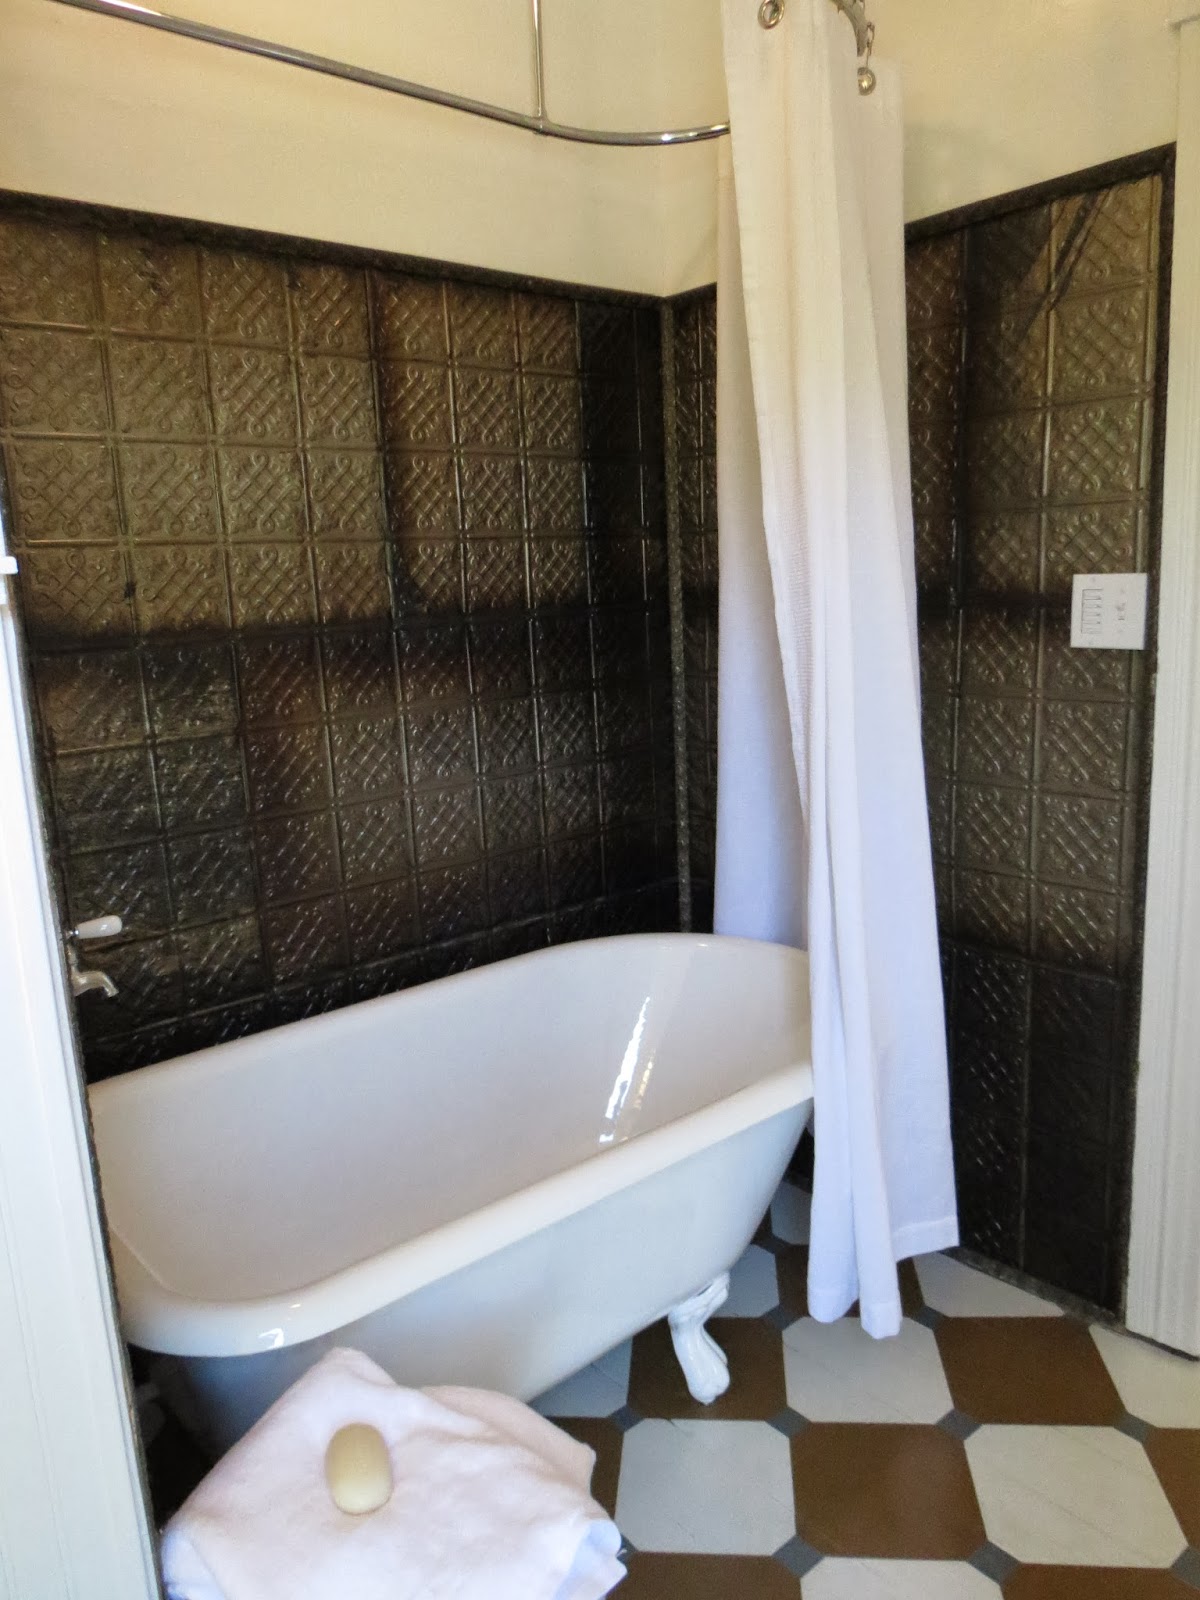 Shannon S Blog My Salvaged Bathroom Design Featured On